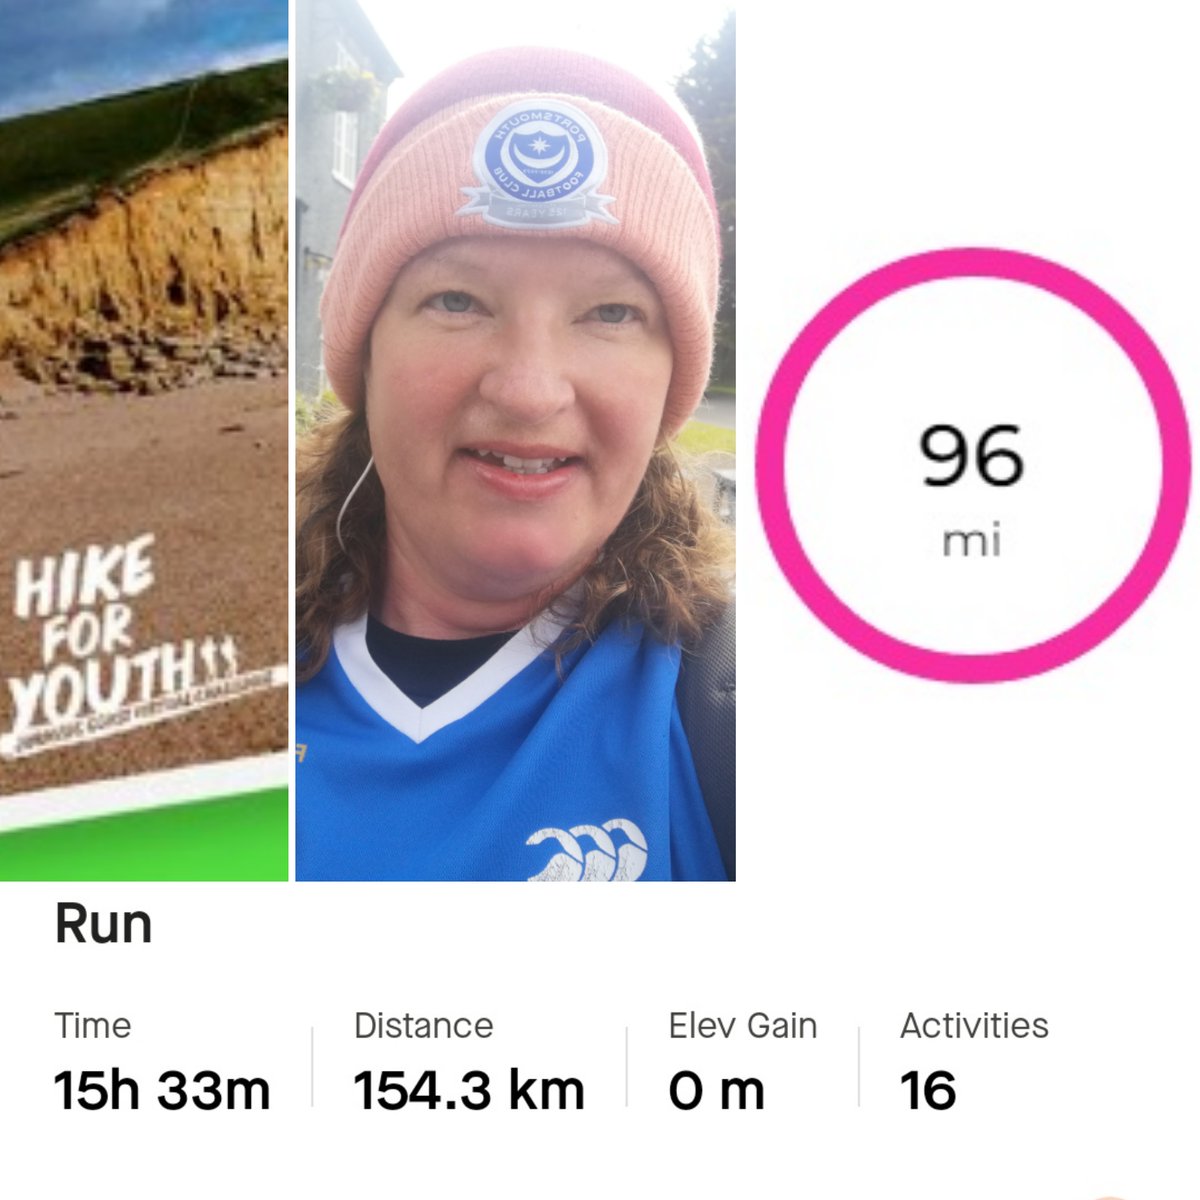 Yesterday I completed my #HikeForYouth challenge! So, that's a wrap - 16 runs, 96 miles & 15.5 hrs of running in 29 days! Thank you to my supporters & well done to all those taking on this challenge too! bit.ly/3J2kILy😘🎉🥳👏#runningwithoutlimits @DofE